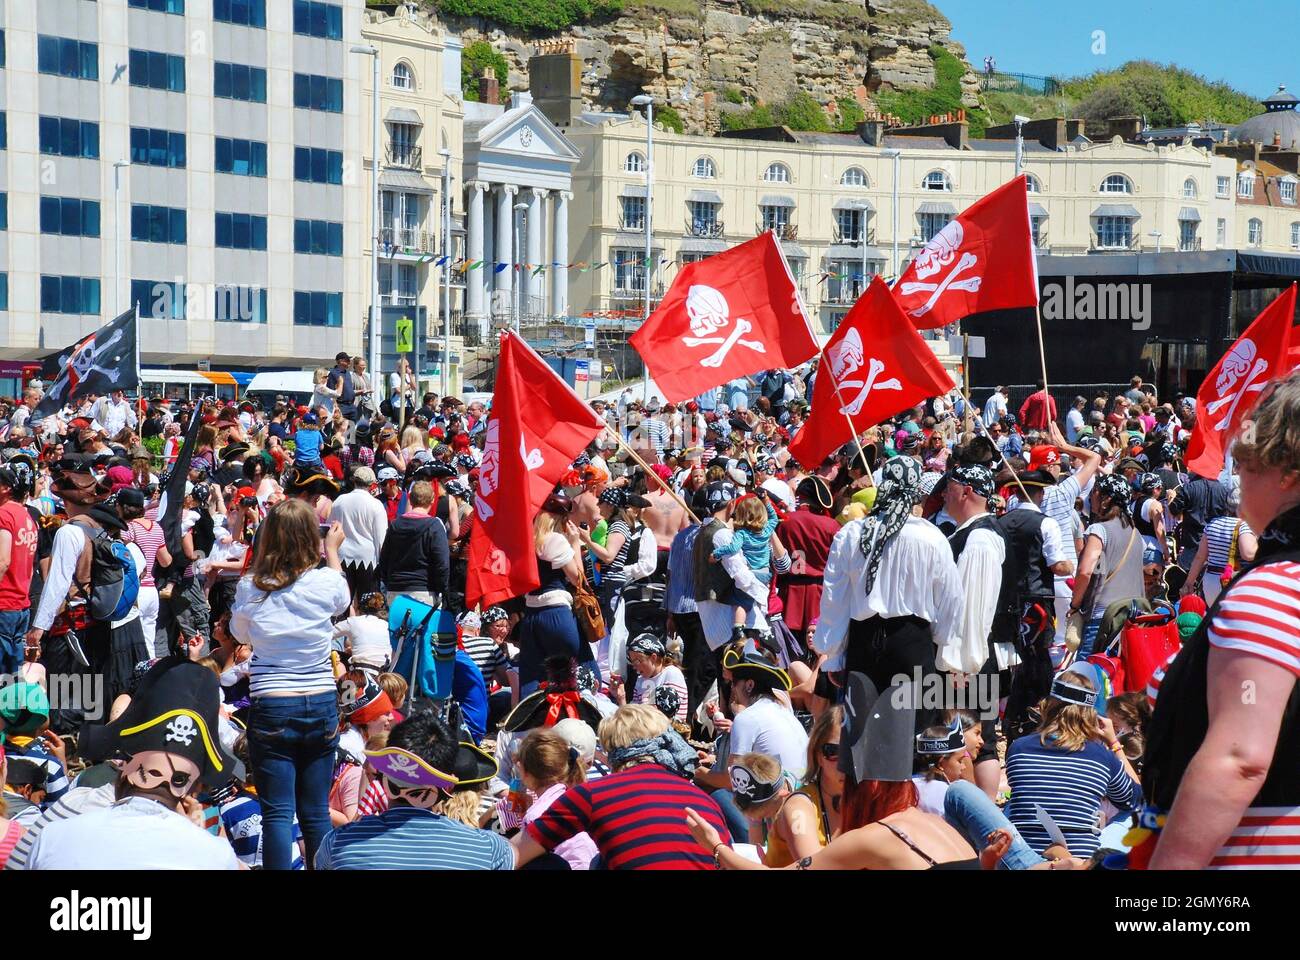 People dressed as pirates take part in the Pirate Day event on the beach at Hastings in East Sussex, England on July 22, 2012. Started in 2009, it was an attempt to win the Guinness World Record for the largest number of pirates gathered on the beach. Stock Photo